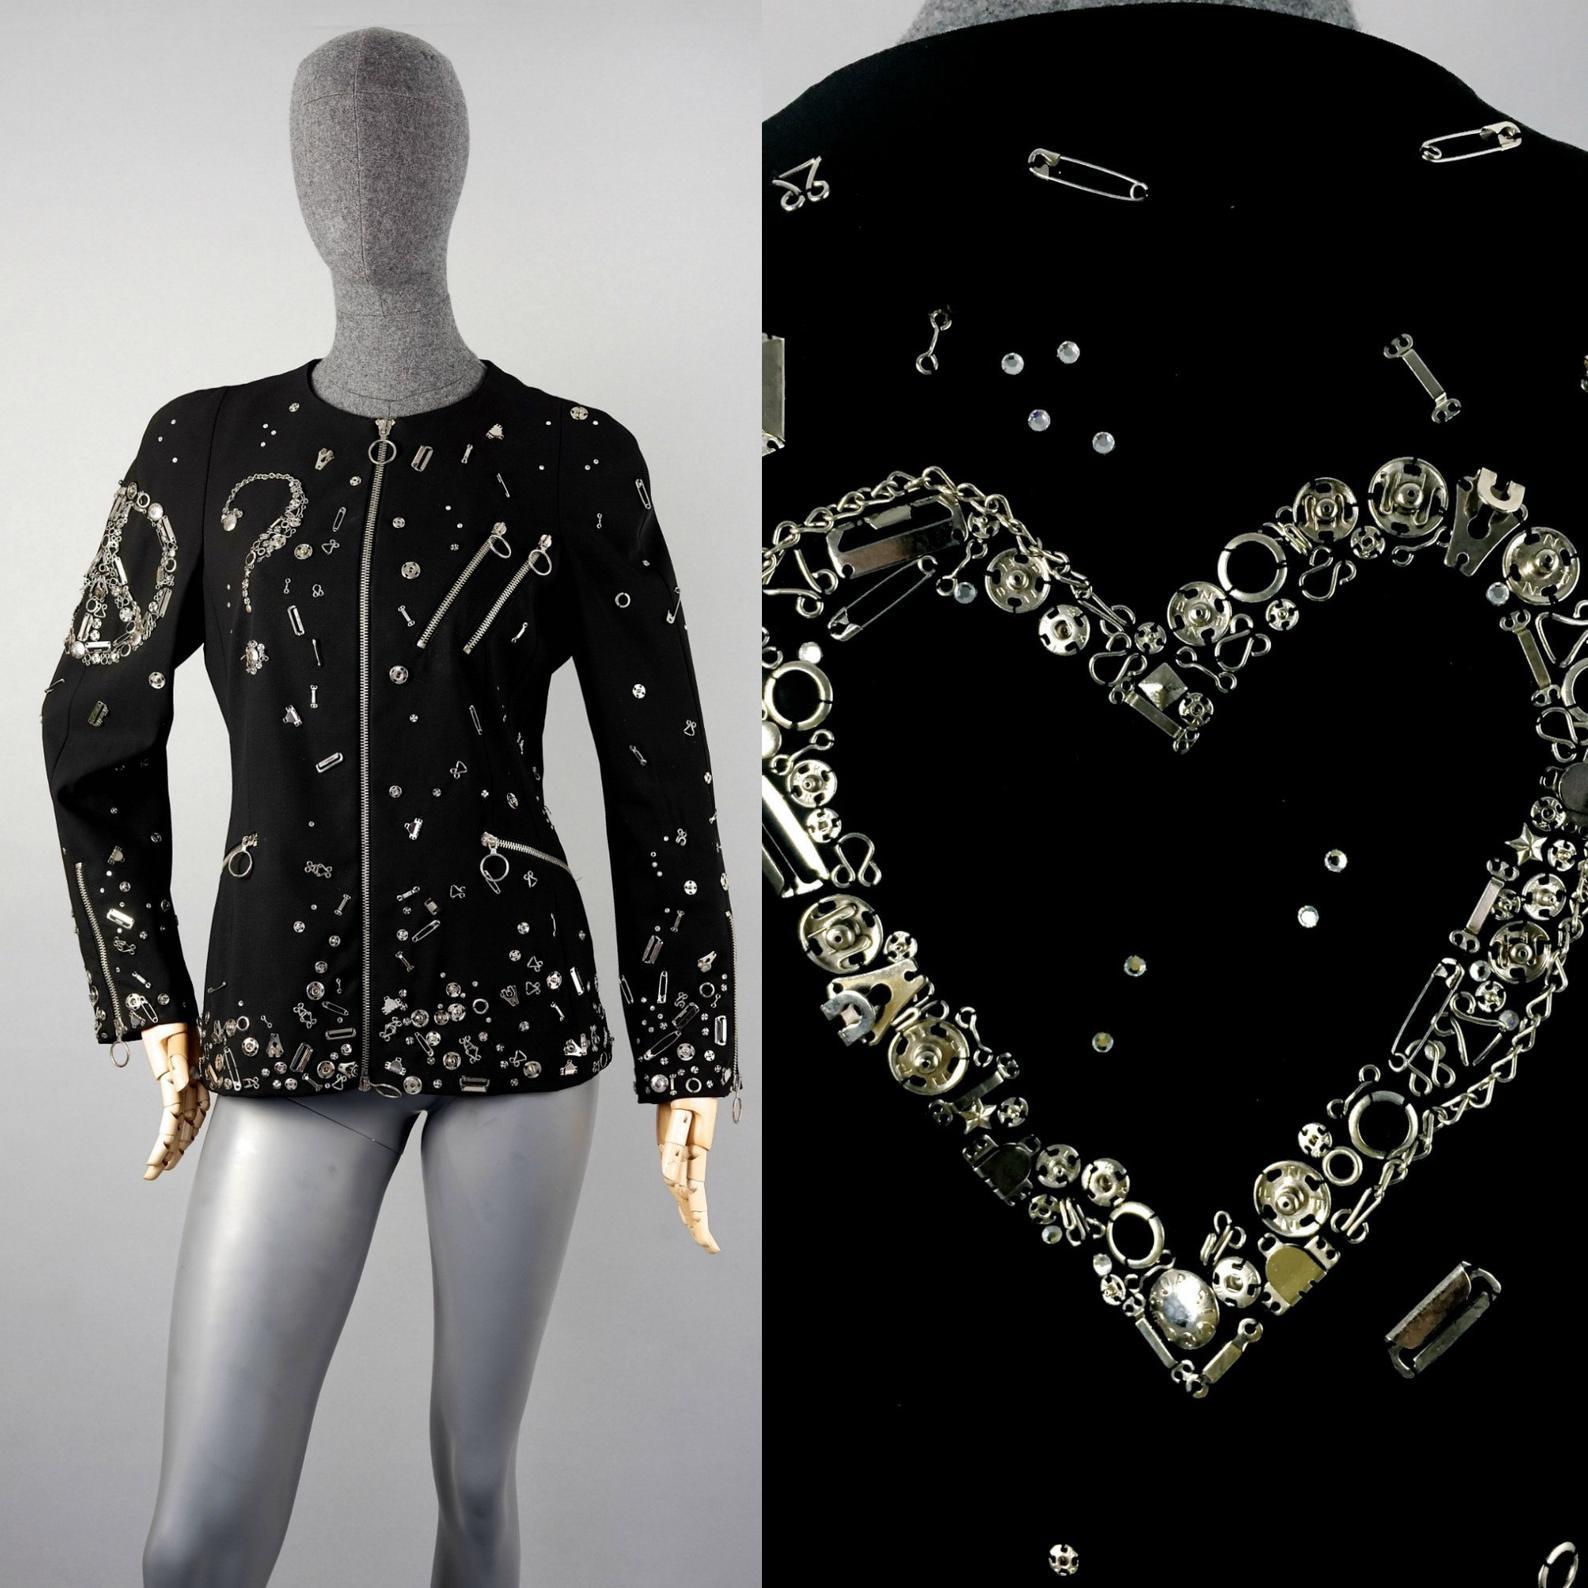 Vintage MOSCHINO COUTURE Peace Heart Question Mark Safety Pin Tailor Sewing Kit Blazer Jacket

Measurements taken laid flat, please double bust and waist:
Shoulder: 17.32 inches (44 cm)
Sleeves: 22.44 inches (57 cm)
Bust: 18.11 inches (46 cm)
Waist: